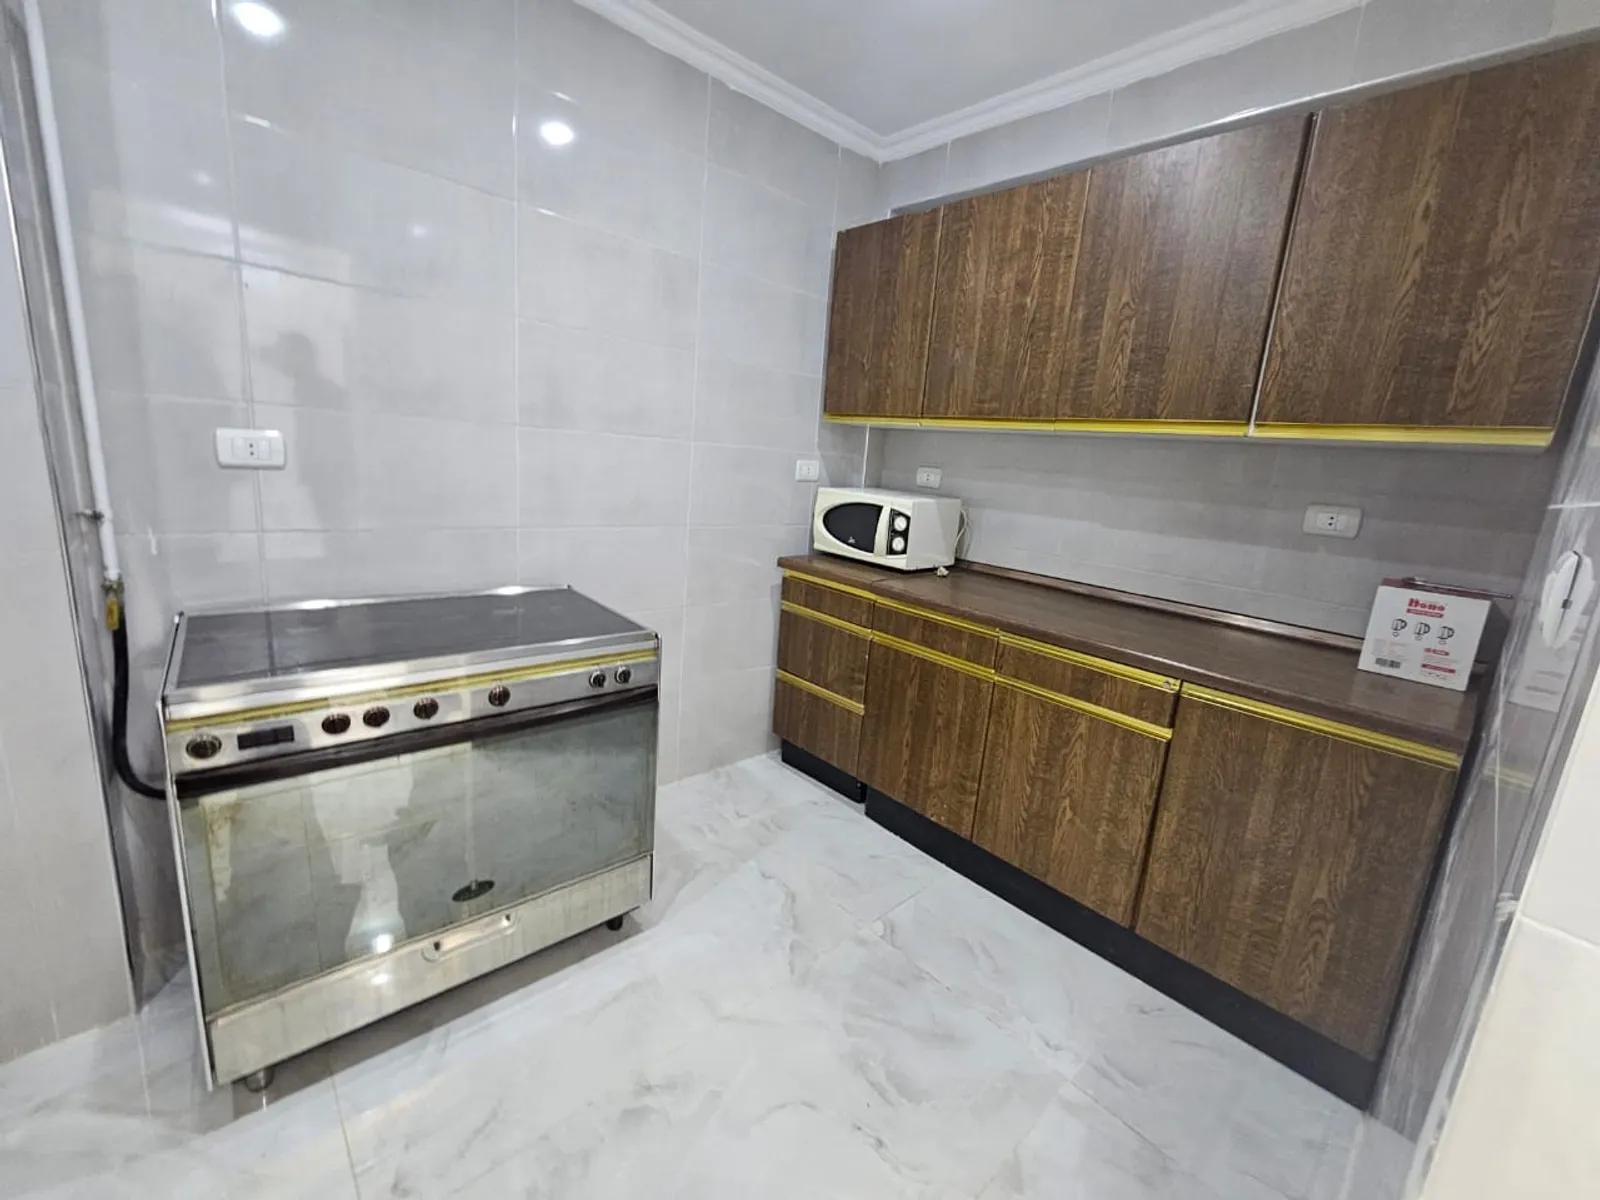 KITCHEN  @ Apartments For Rent In Maadi Maadi Degla Area: 125 m² consists of 2 Bedrooms 2 Bathrooms Furnished 5 stars #5846-1